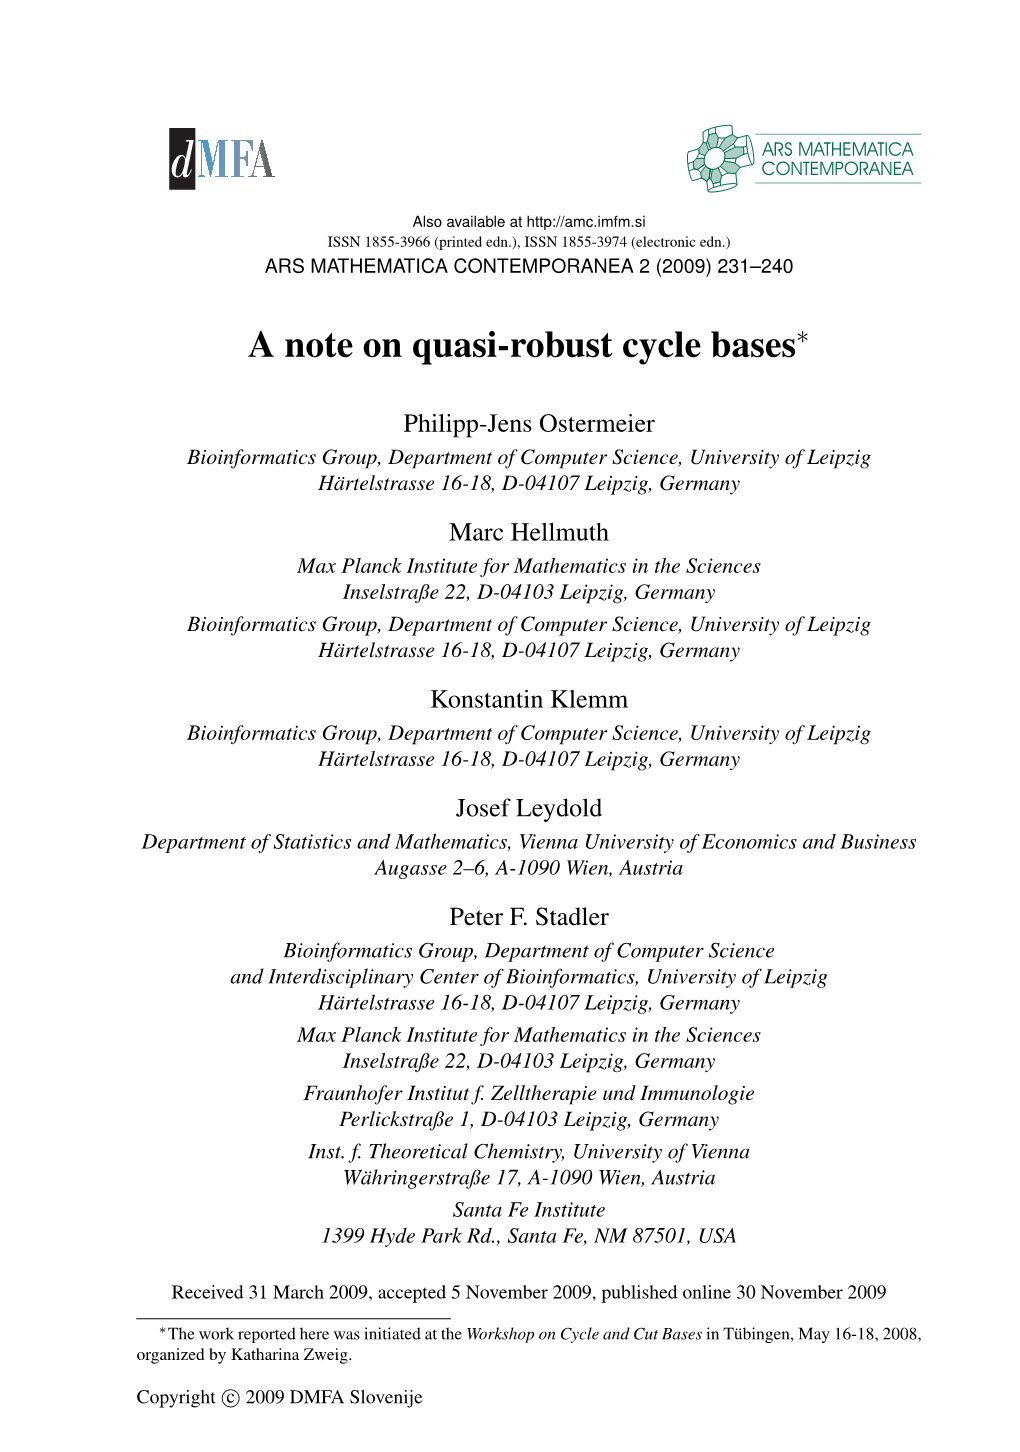 A Note on Quasi-Robust Cycle Bases∗